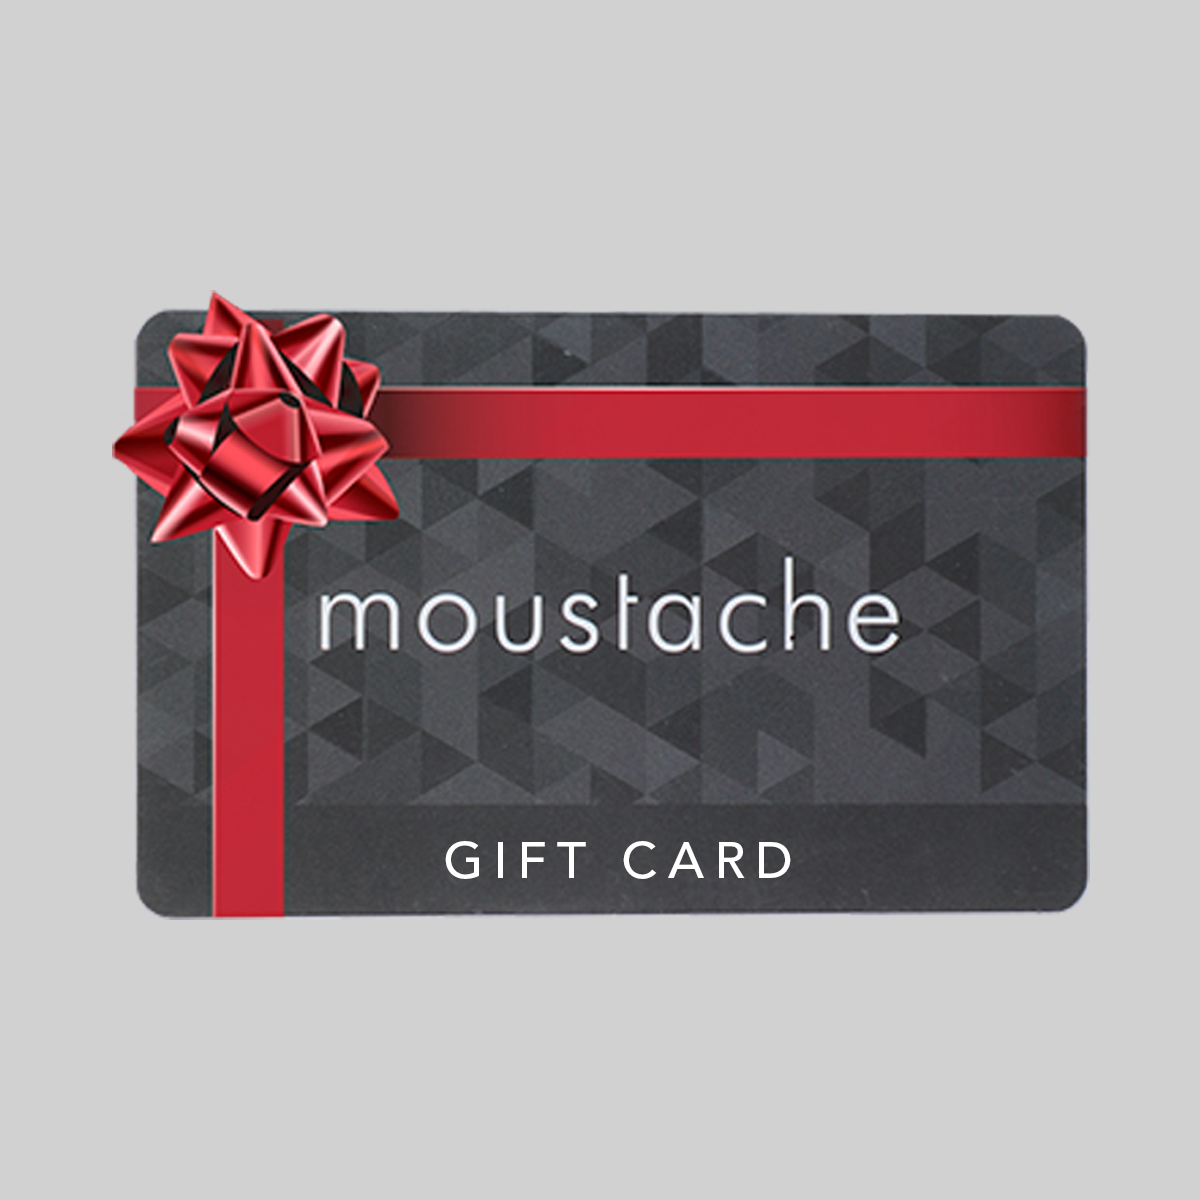 Moustache Gift Card